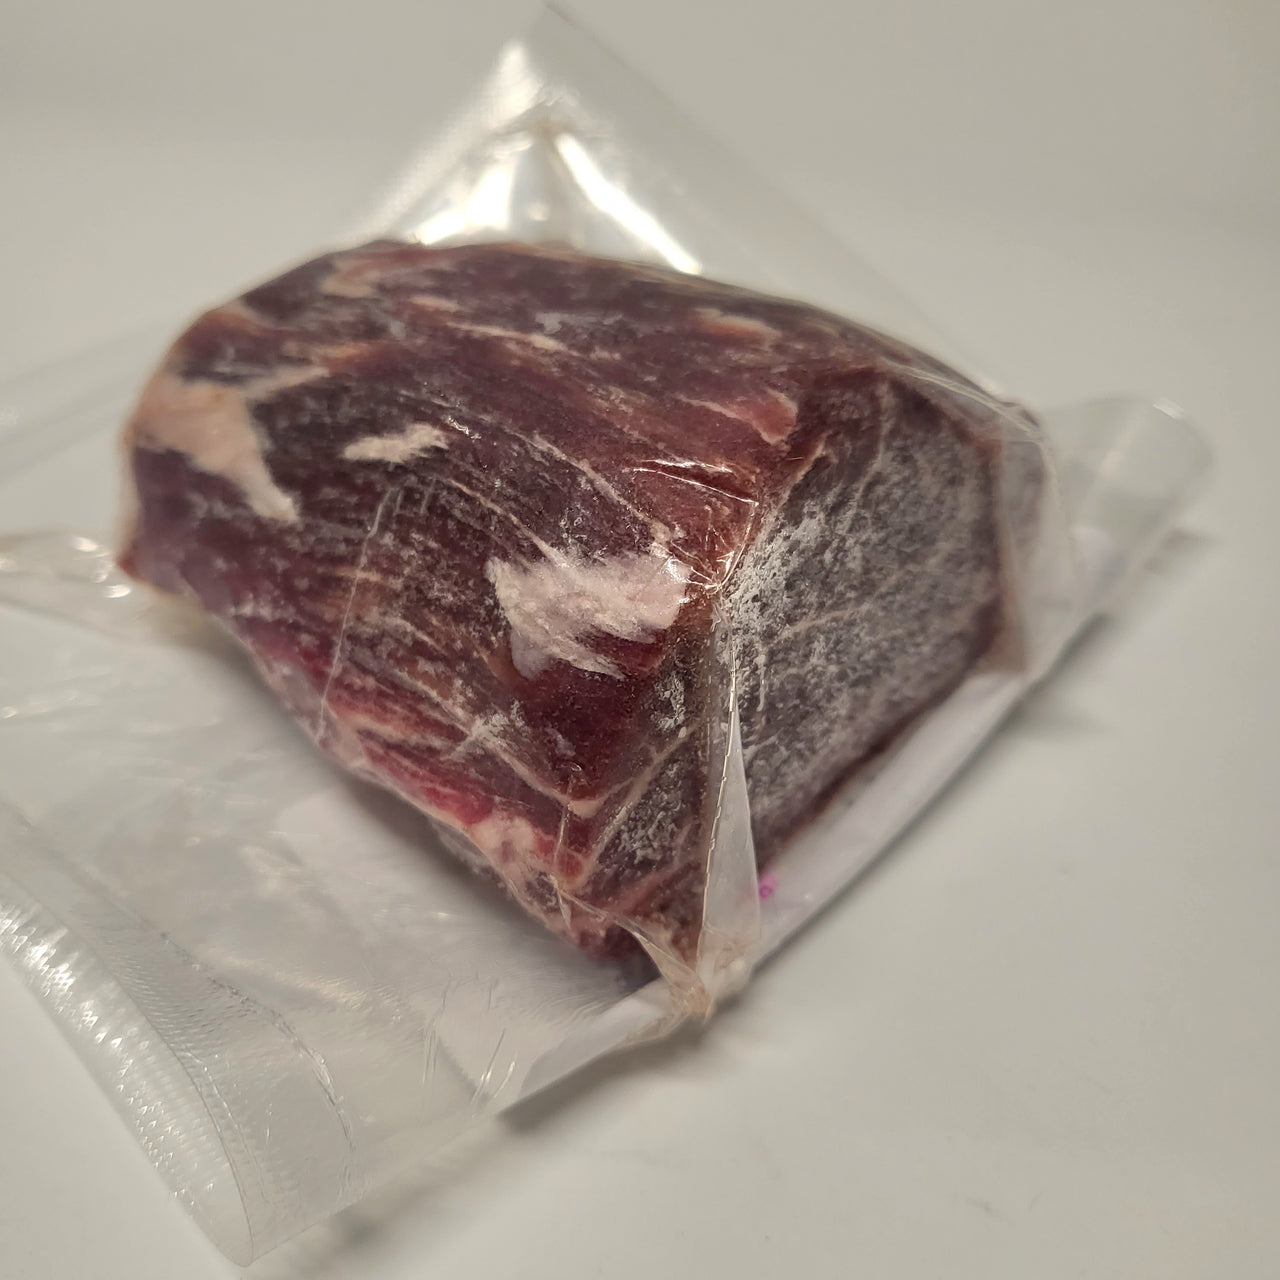 Grass Fed Grass FInished Beef Filet Steak 8 oz Japanese Black Wagyu Beef Full Blood AGED 21+ Days